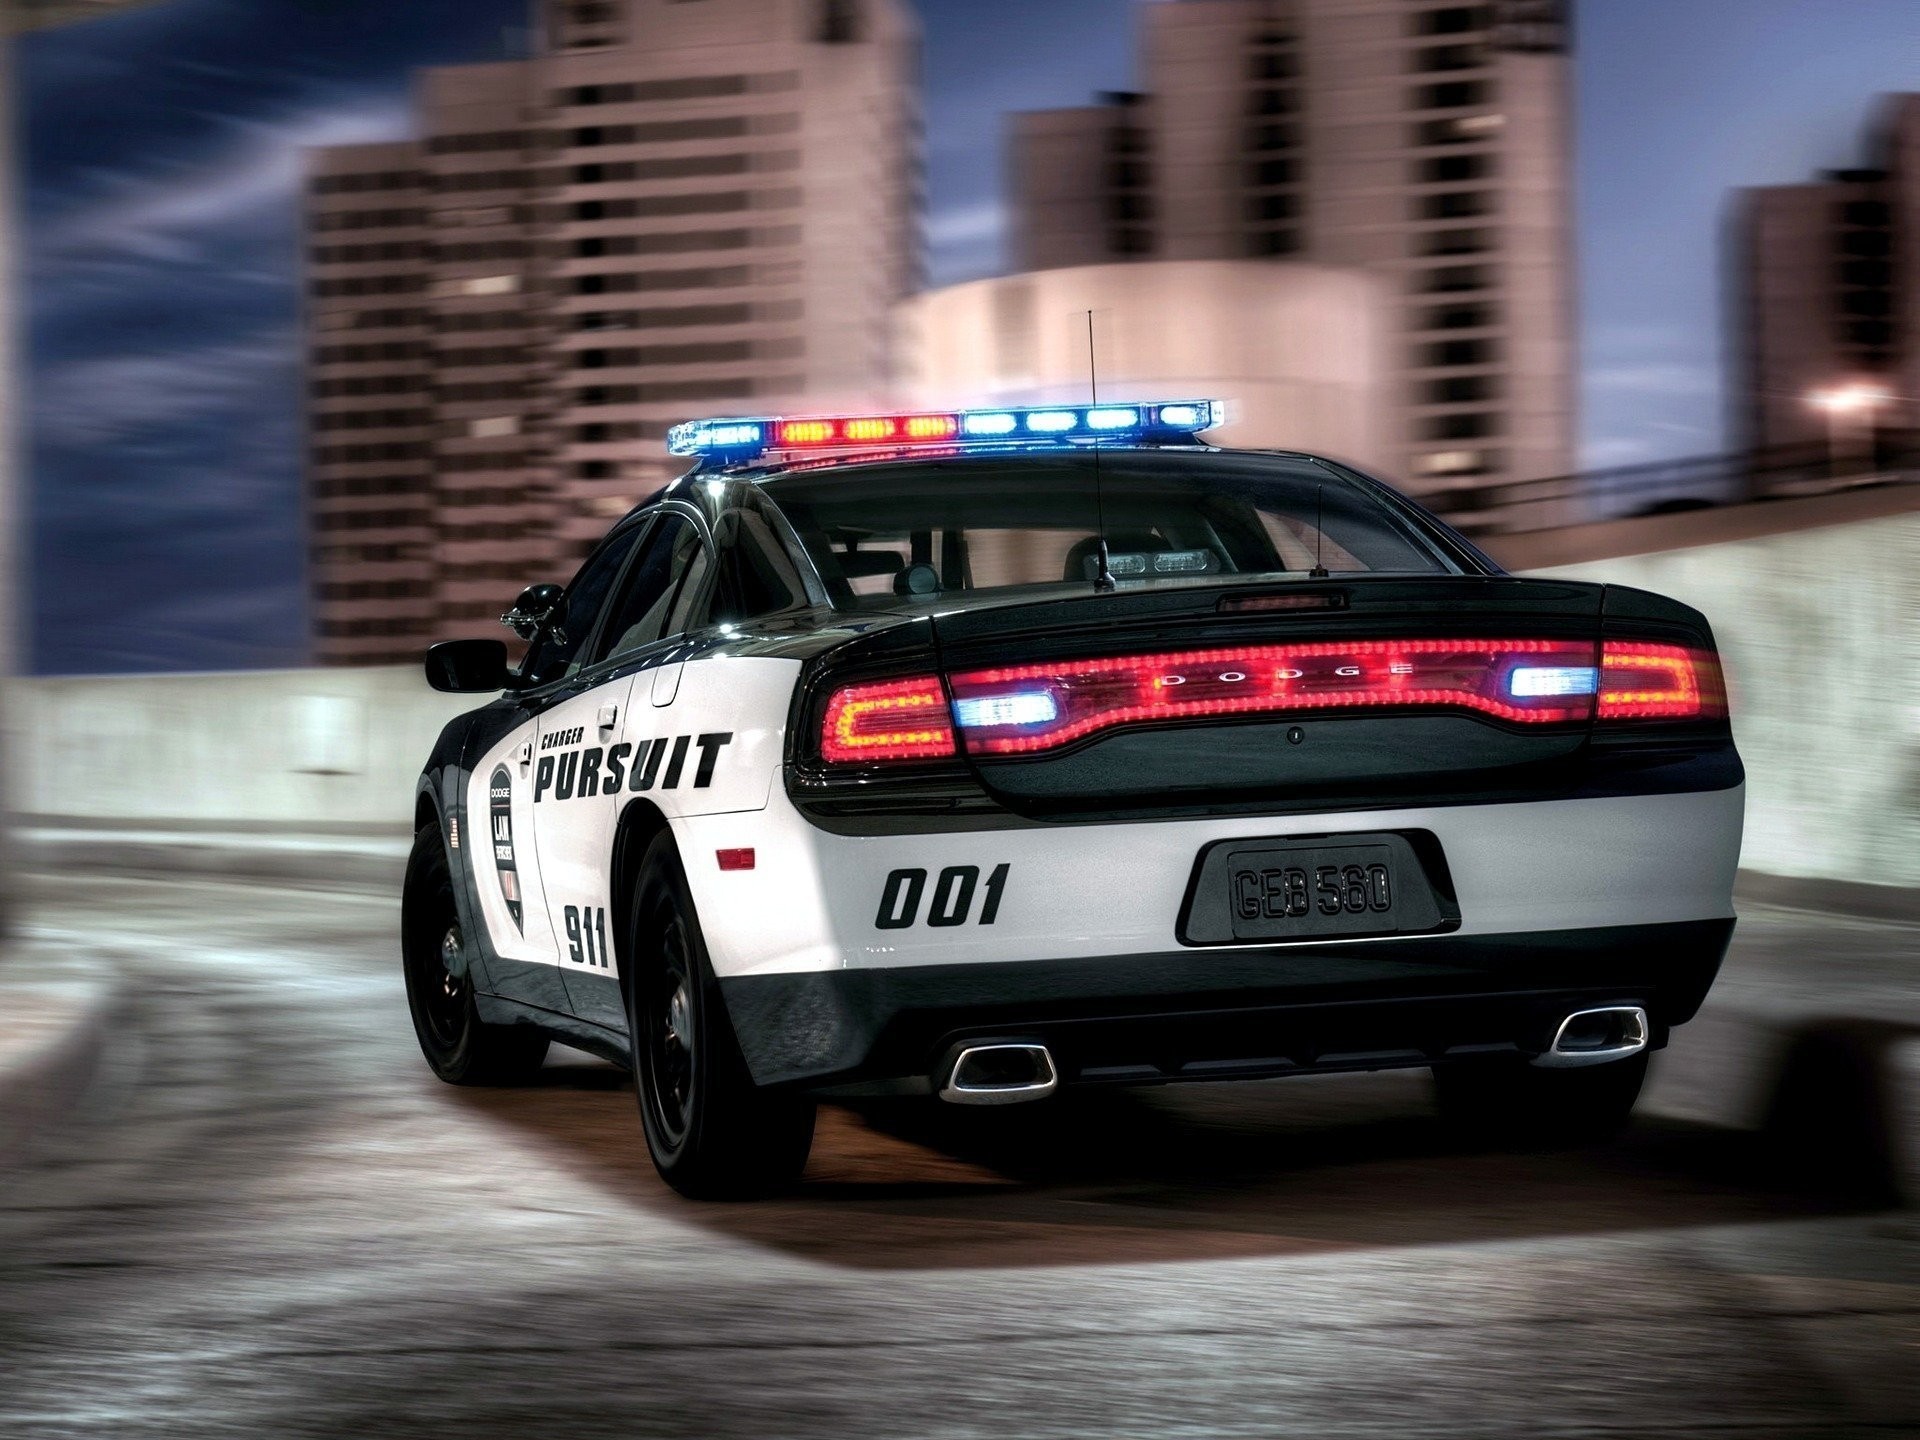 Red Car Wallpaper Iphone Fresh Street Racing Cars Wallpapers - Dodge Charger Pursuit 2012 - HD Wallpaper 